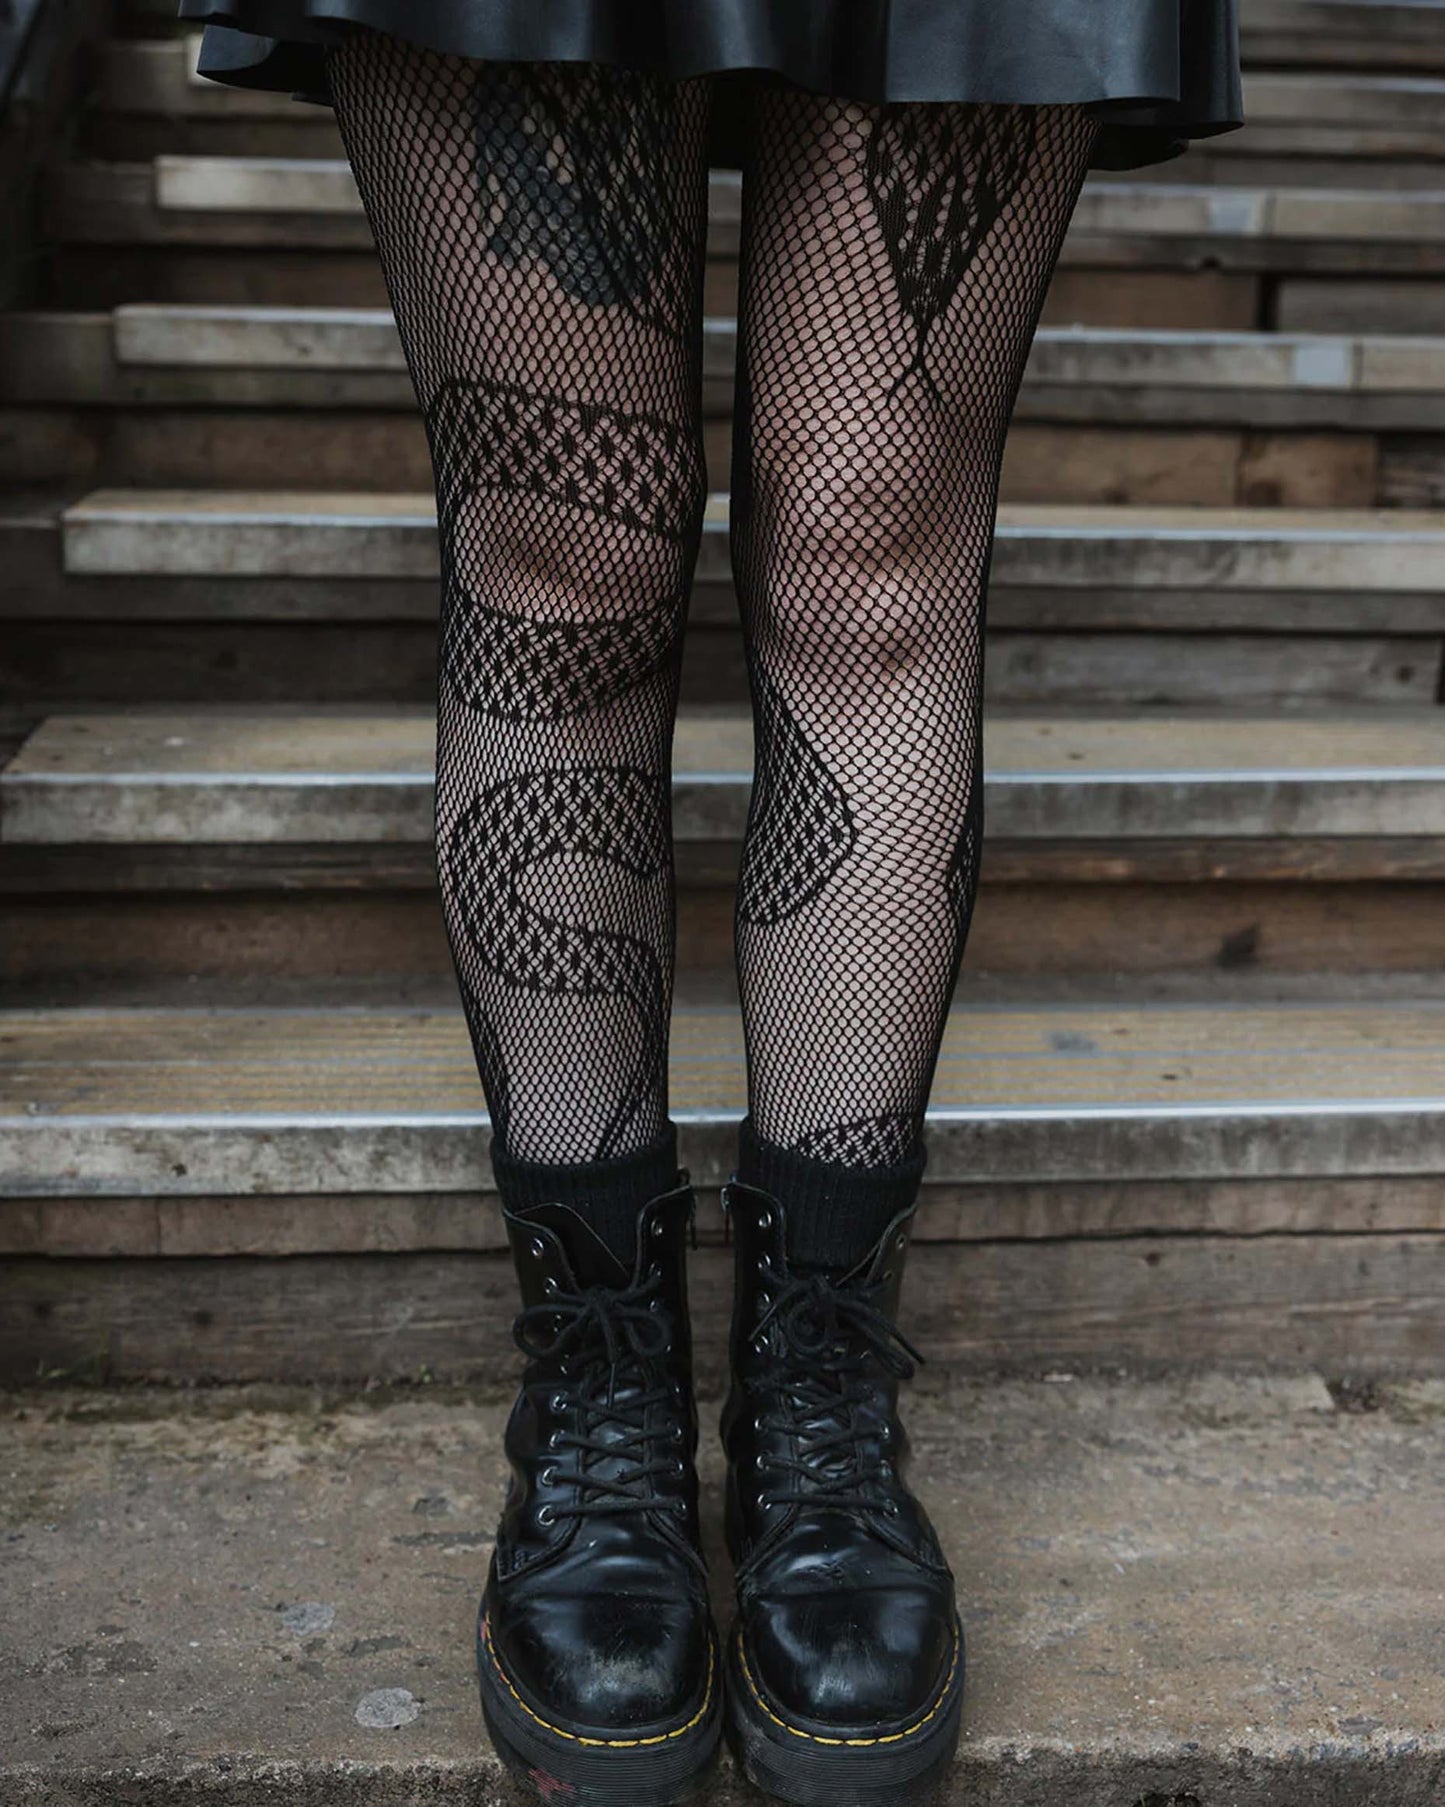 Pamela Mann Snake Net Tights - Black openwork fishnet tights with an all over snake design, worn with a leather skater skirt and doc martin boots.